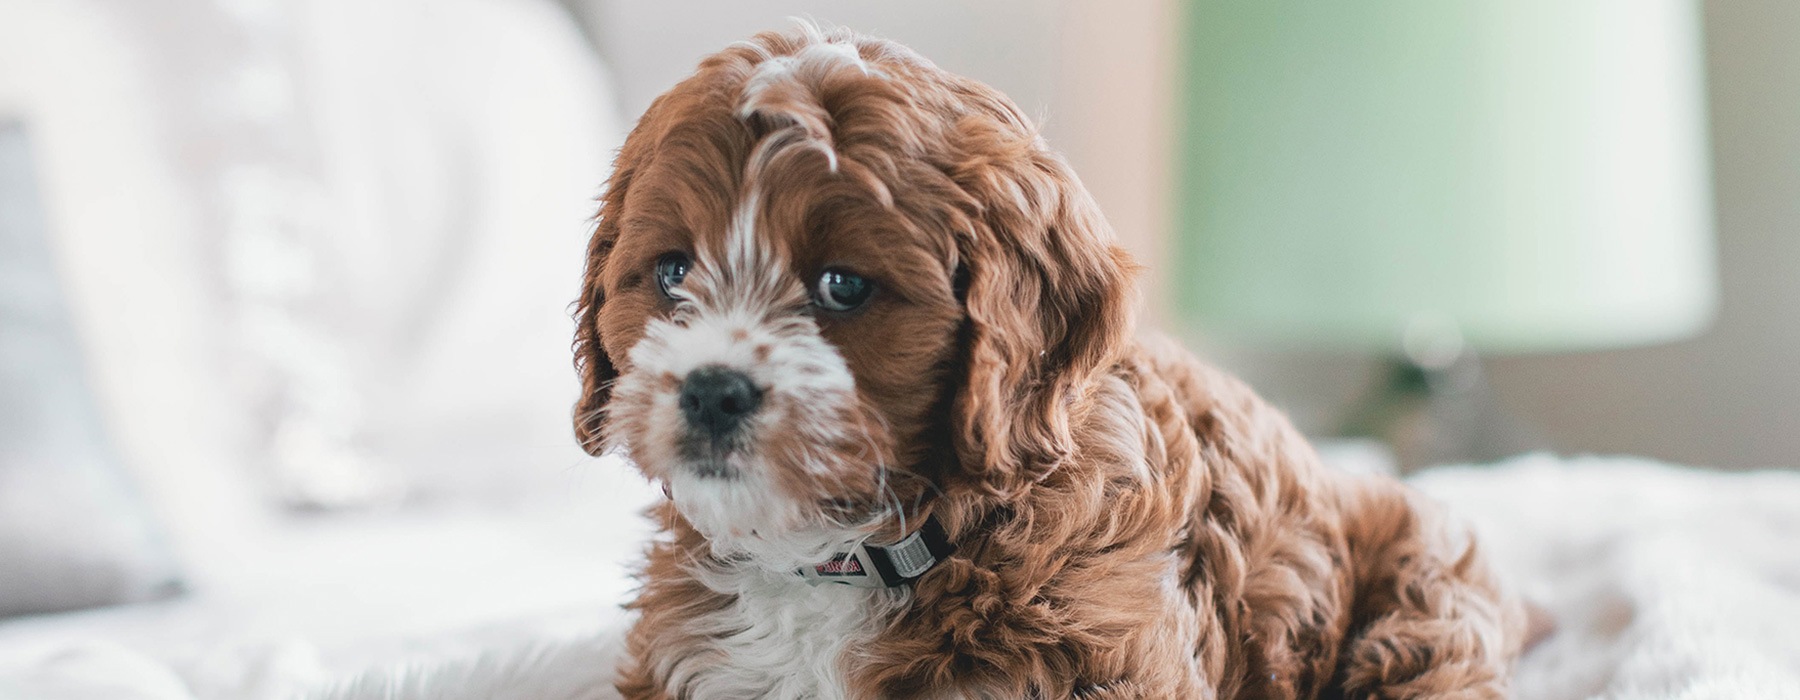 lifestyle image of a puppy looking at the camera while sitting in a bright bedroom